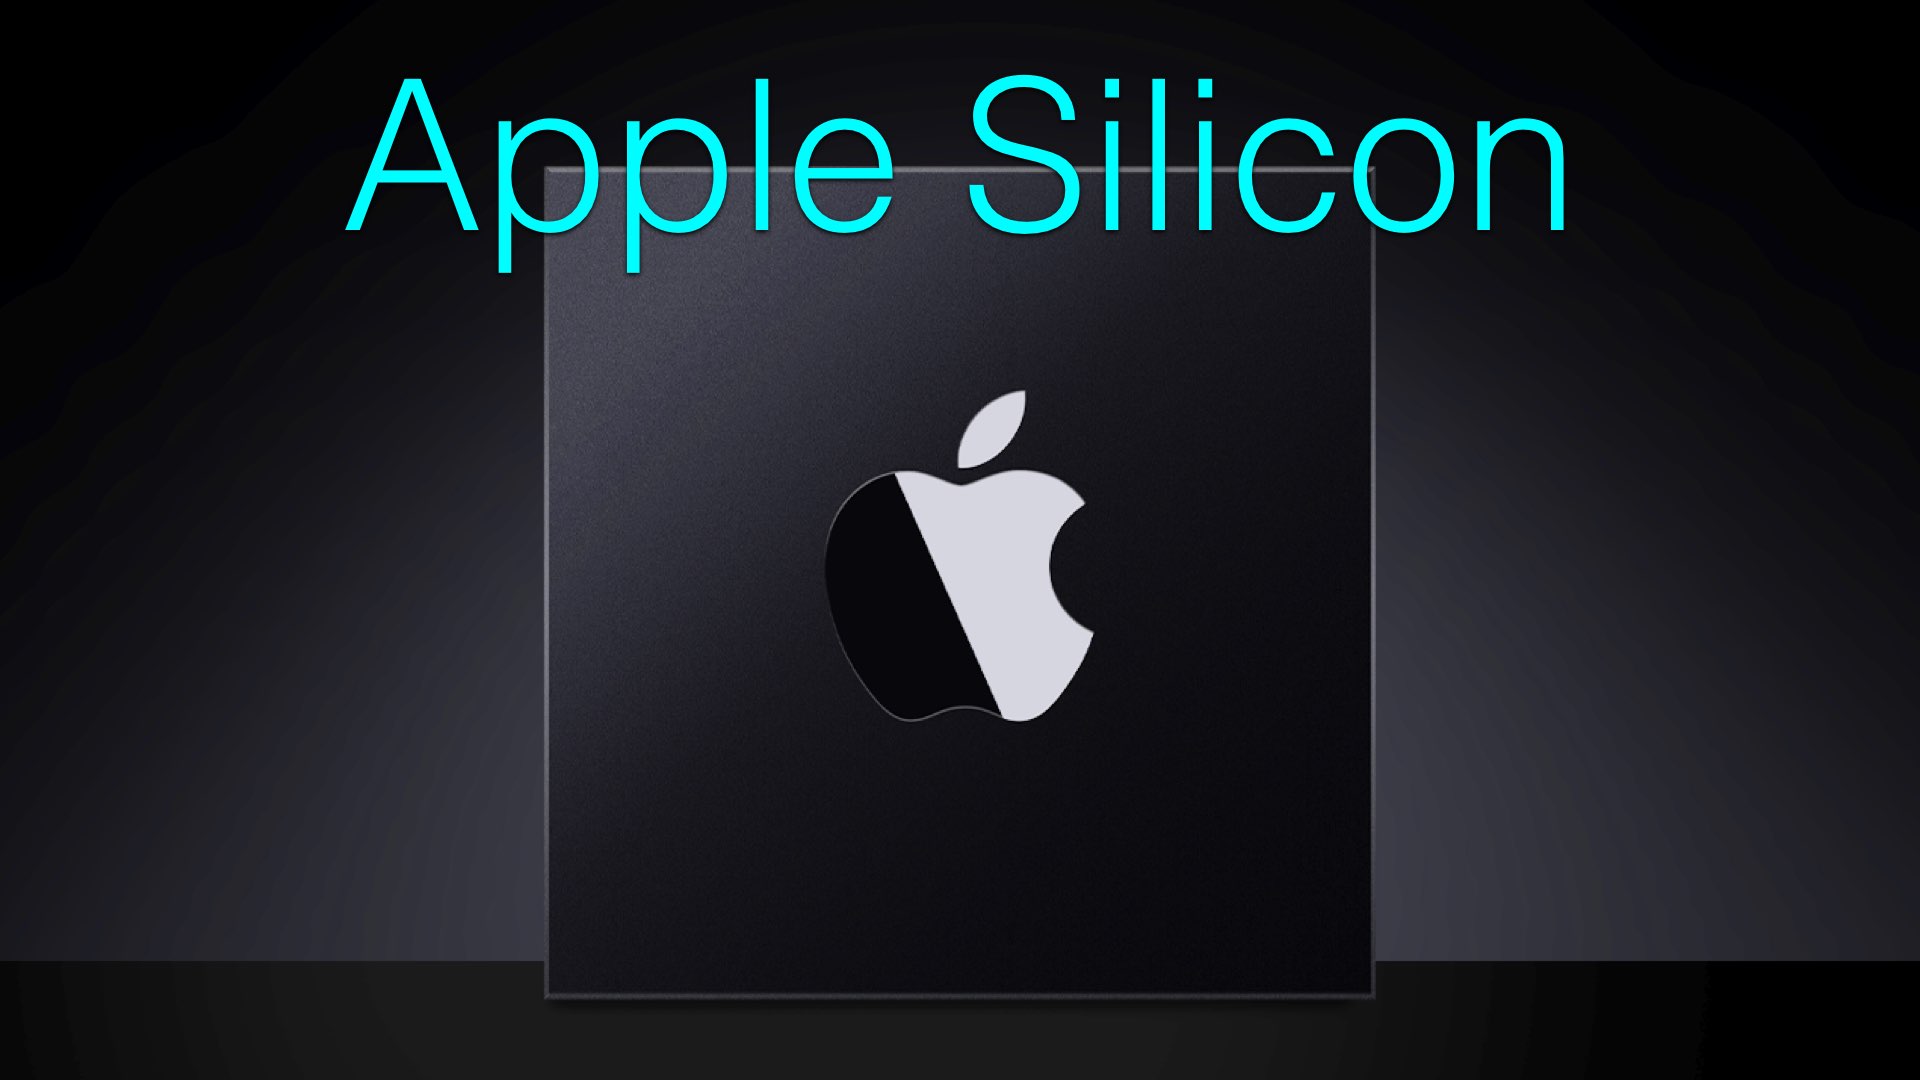 Apple Silicon is going to power Macs in late 2020